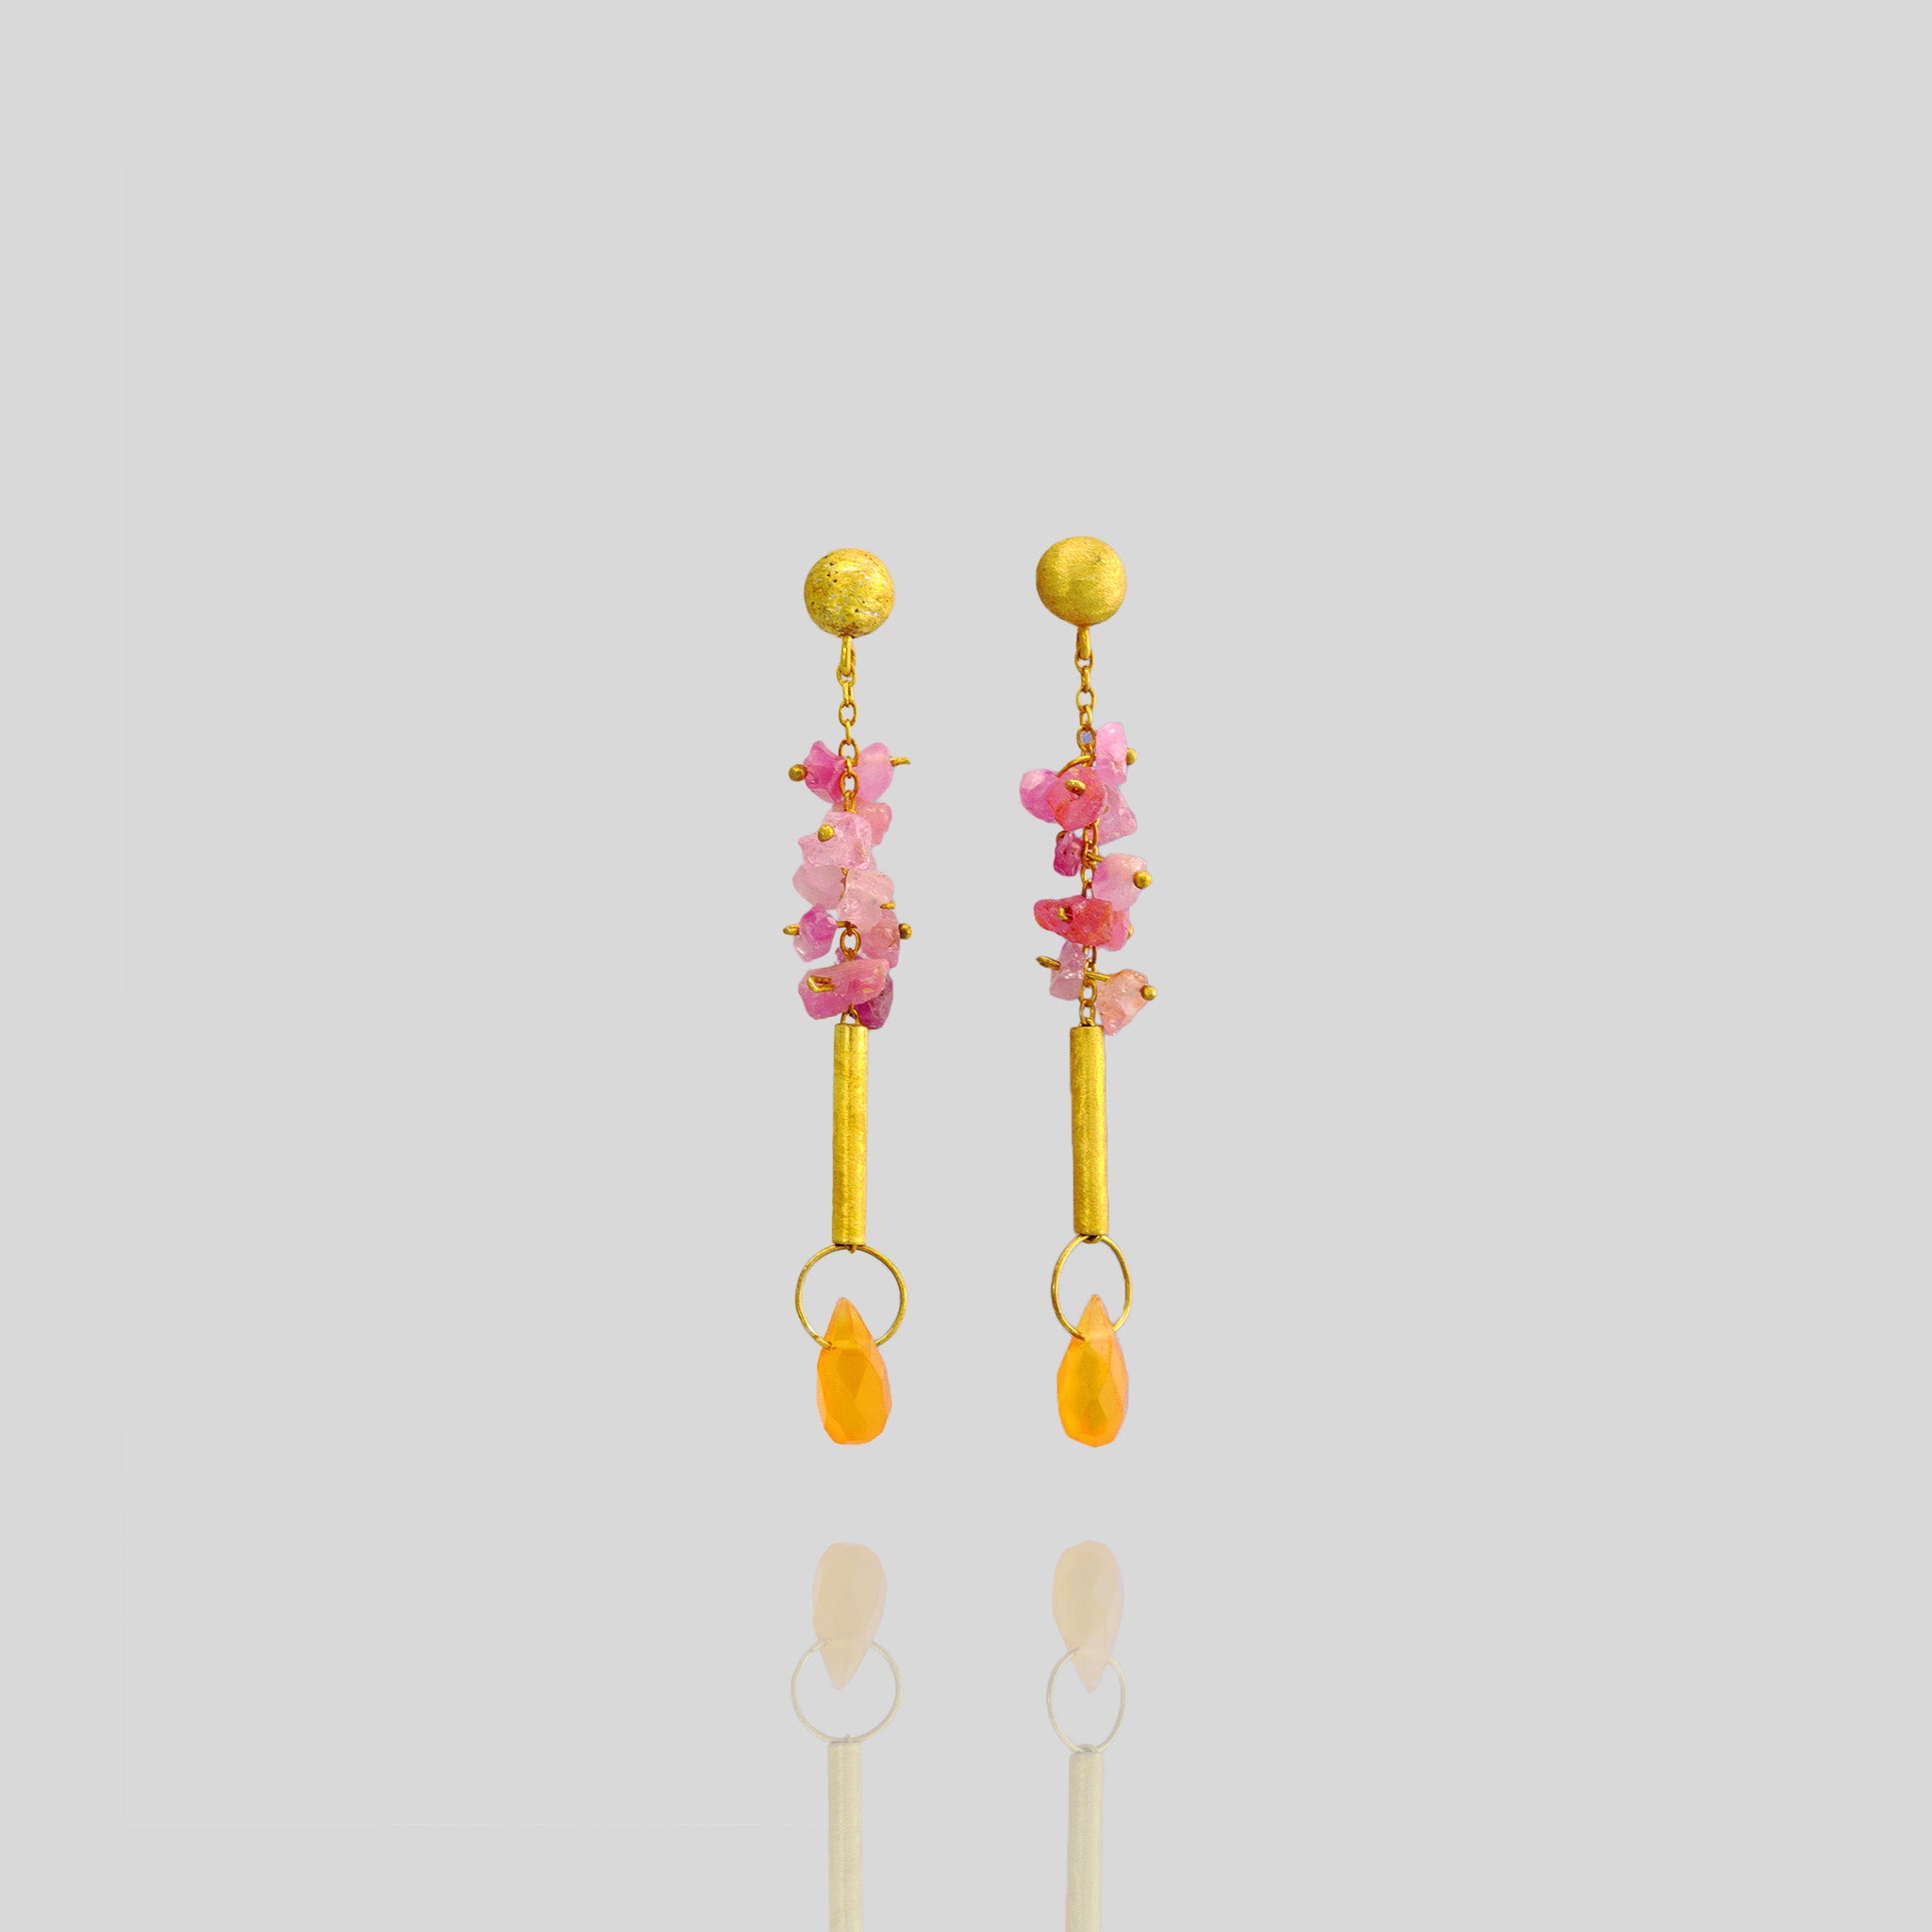 Venus Earrings with raw pink Sapphires and Carnelian gemstone drop, exuding timeless elegance and luxury.